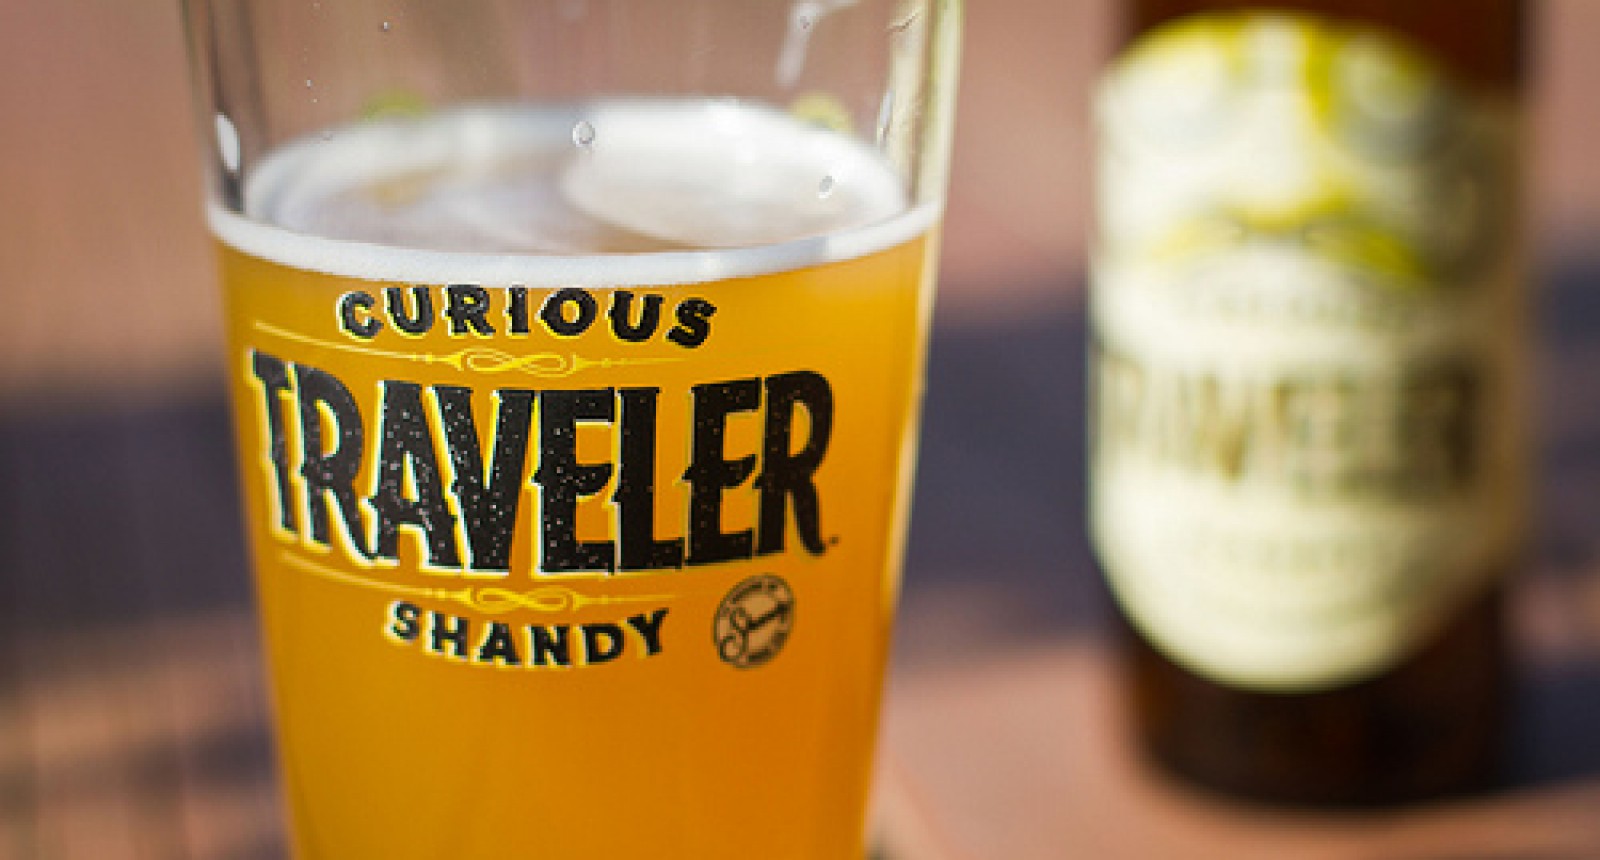 The Traveler Beer Company